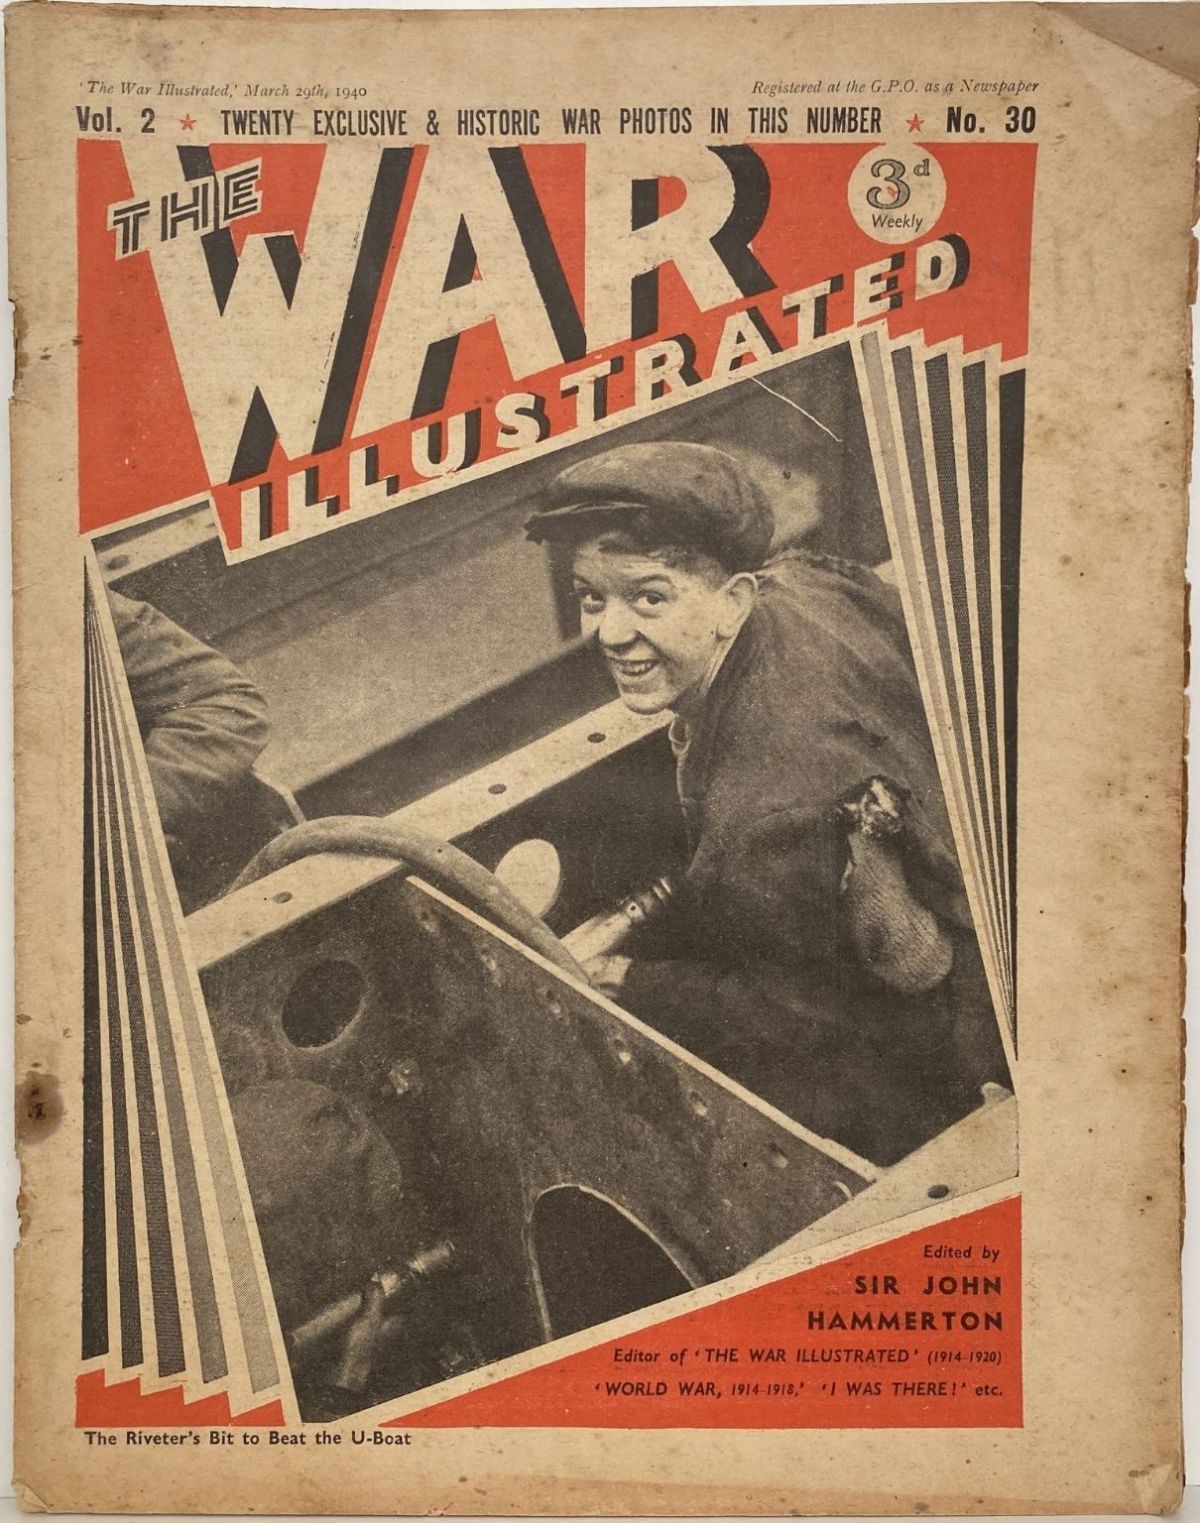 THE WAR ILLUSTRATED - Vol 2, No 30, 29th March 1940